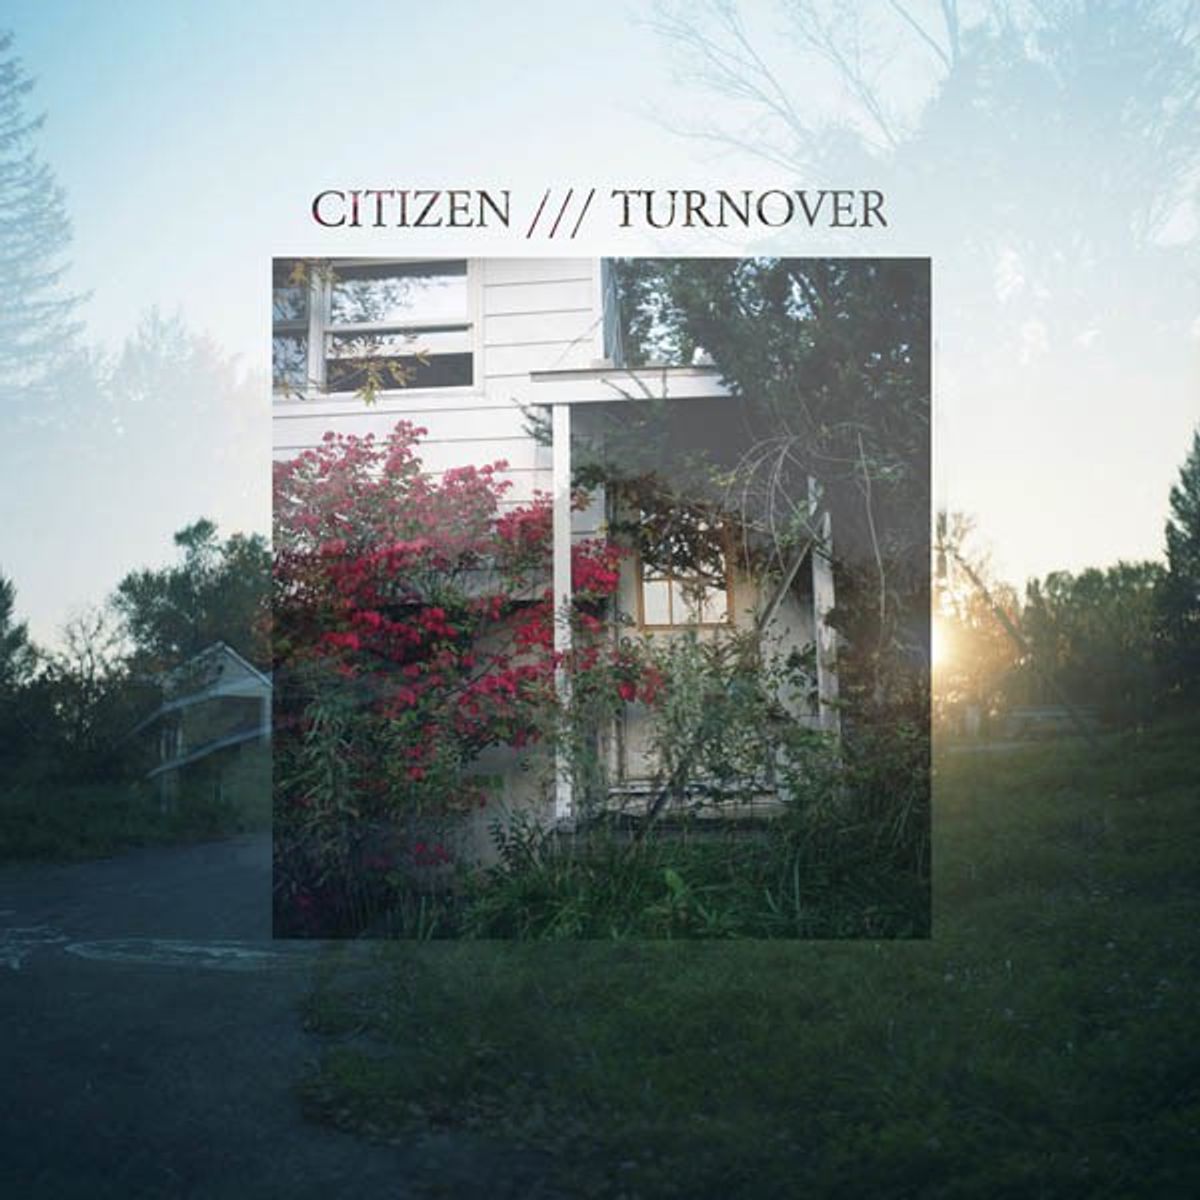 Citizen and Turnover